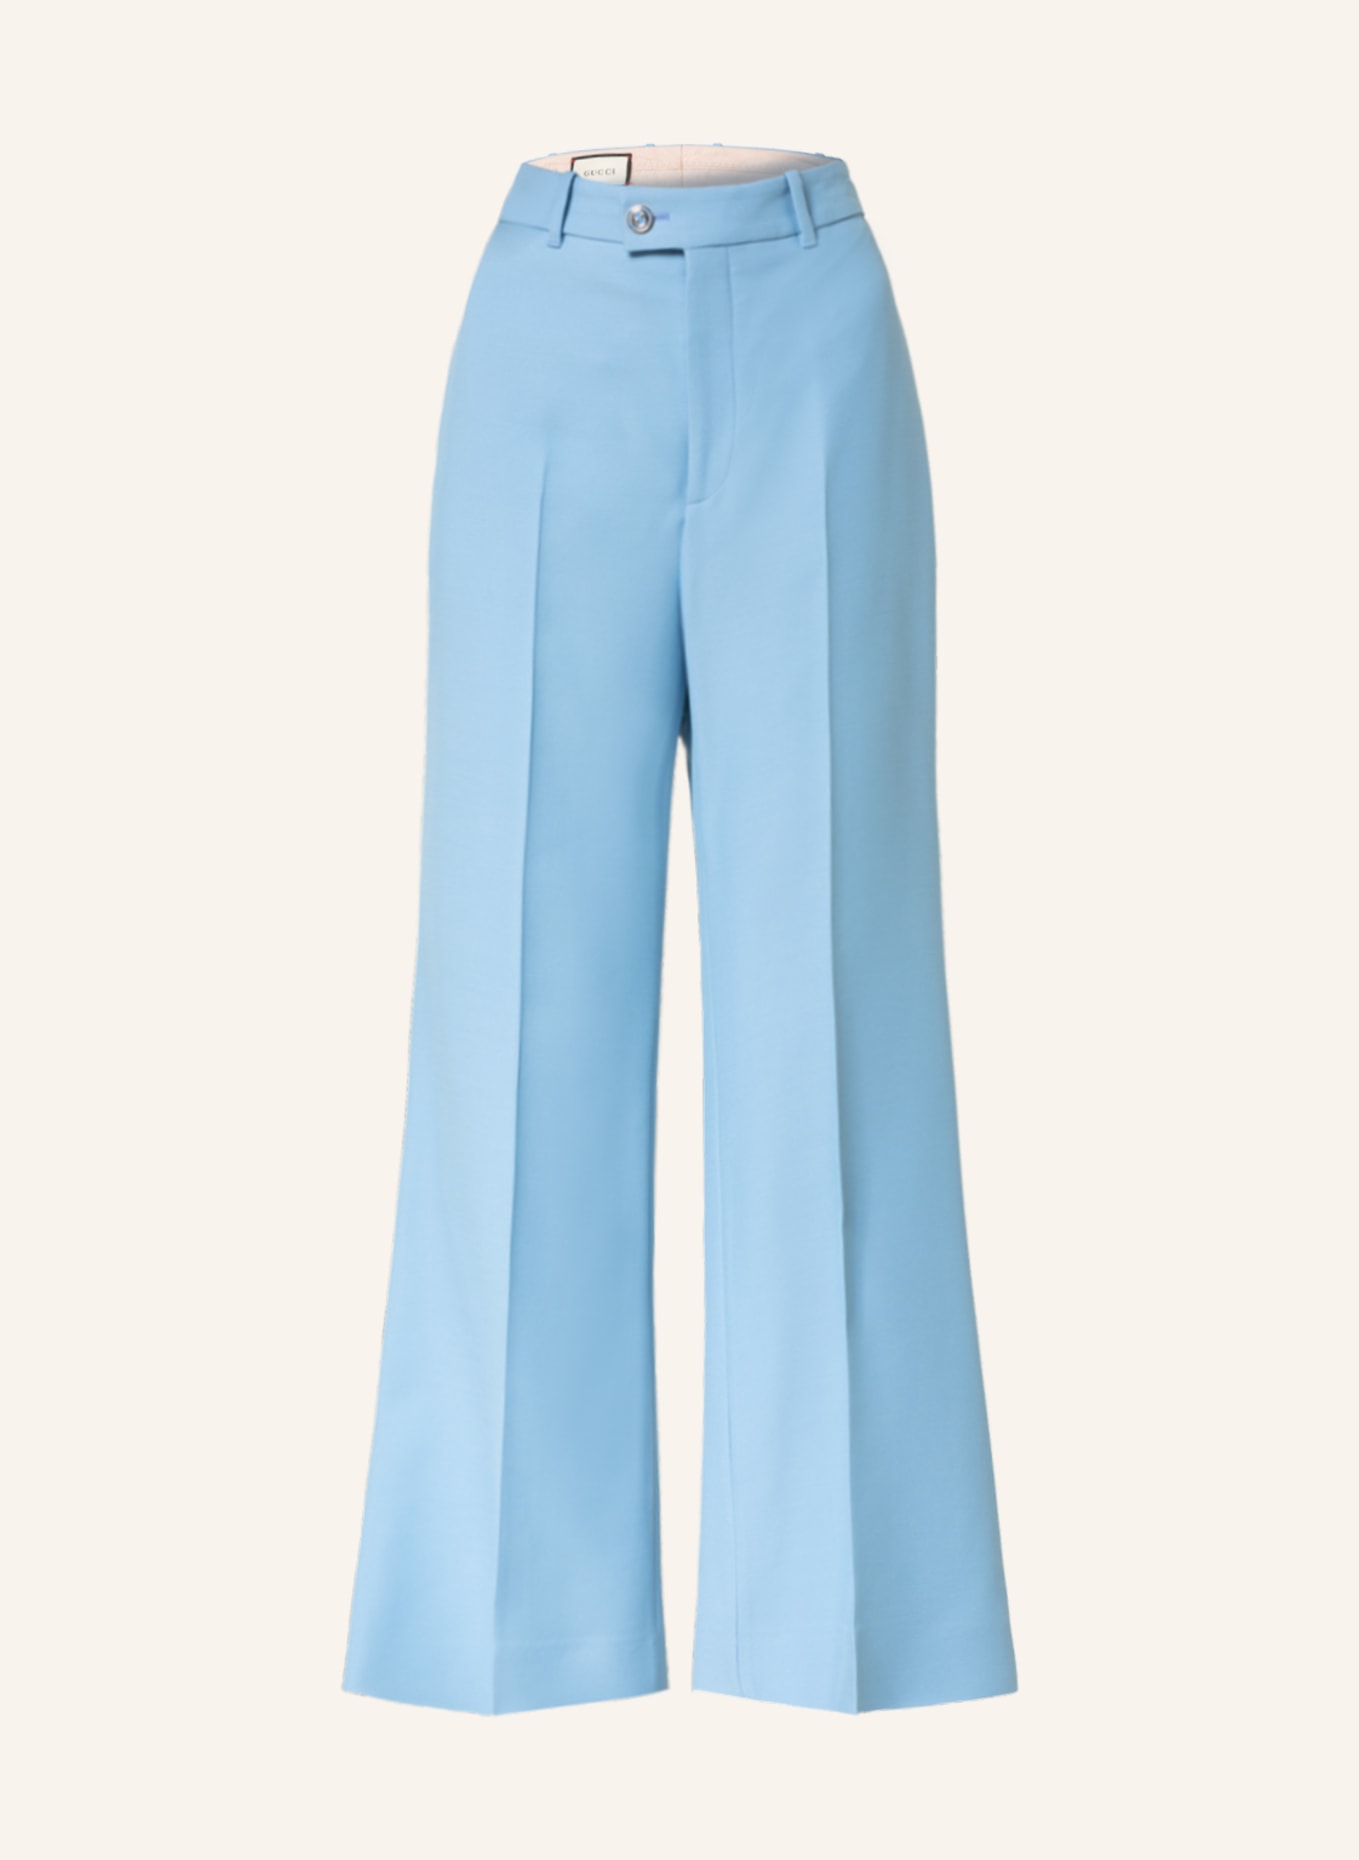 Latest Gucci Trousers arrivals  Women  4 products  FASHIOLAin